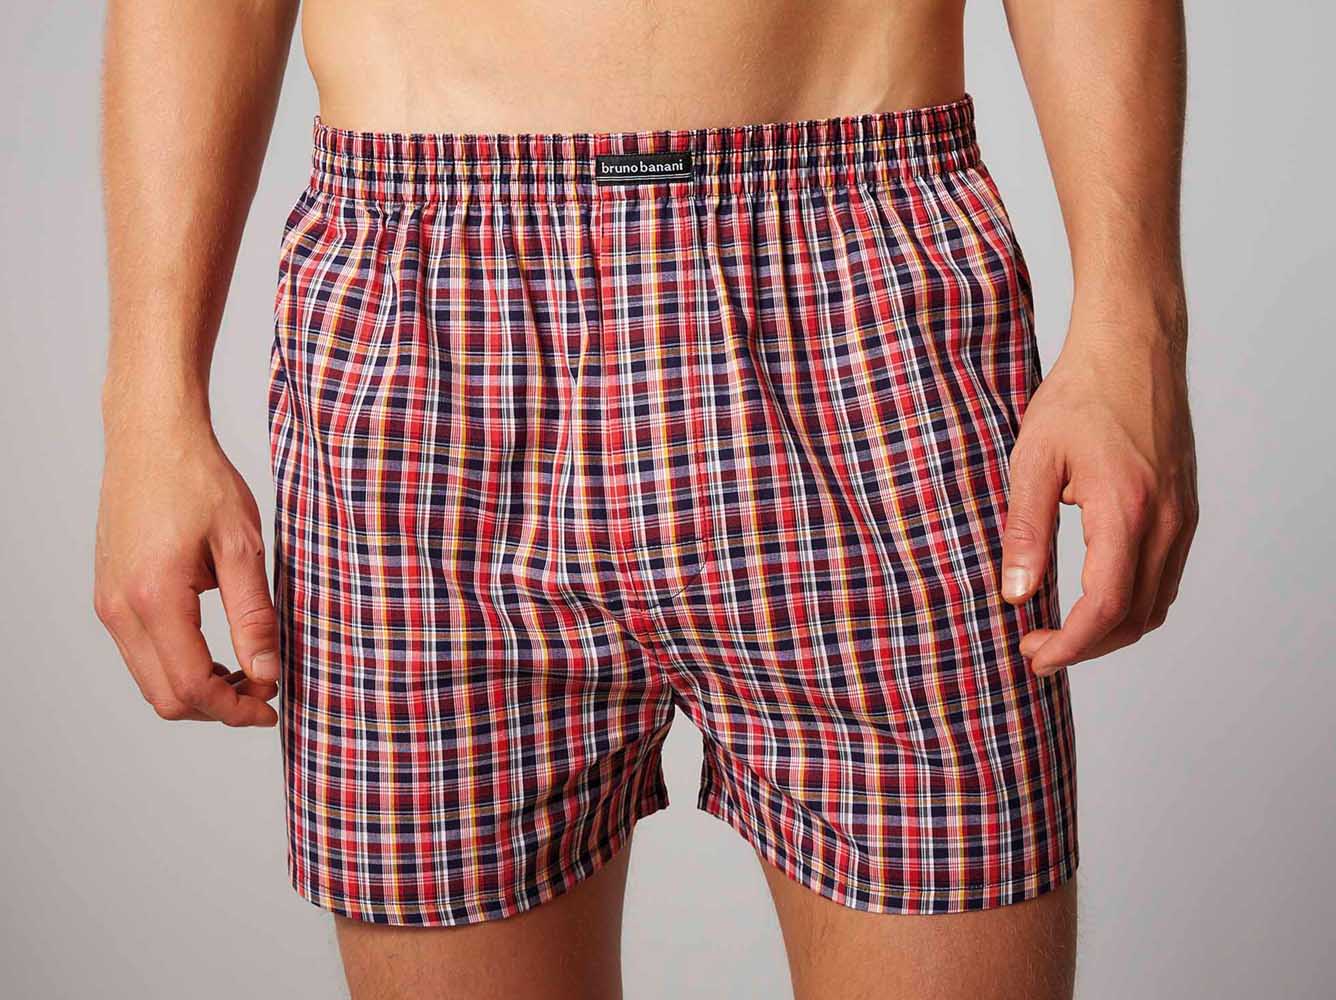 loose boxer shorts with a checked pattern